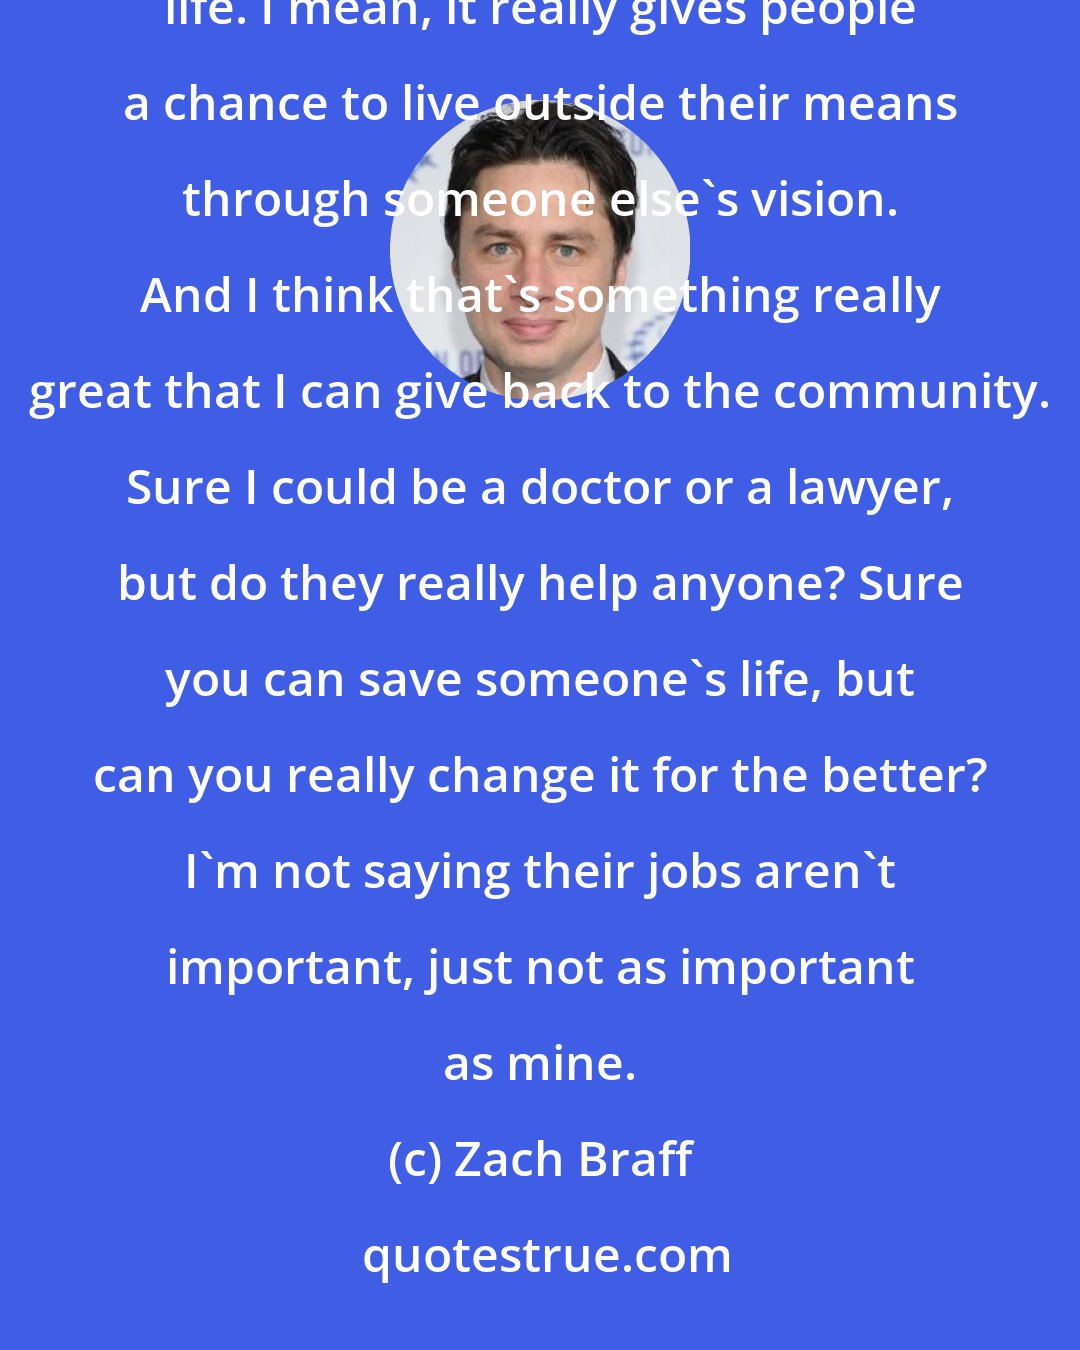 Zach Braff: I'm really not one to brag, but I think my job is one of the most important things someone can do with their life. I mean, it really gives people a chance to live outside their means through someone else's vision. And I think that's something really great that I can give back to the community. Sure I could be a doctor or a lawyer, but do they really help anyone? Sure you can save someone's life, but can you really change it for the better? I'm not saying their jobs aren't important, just not as important as mine.